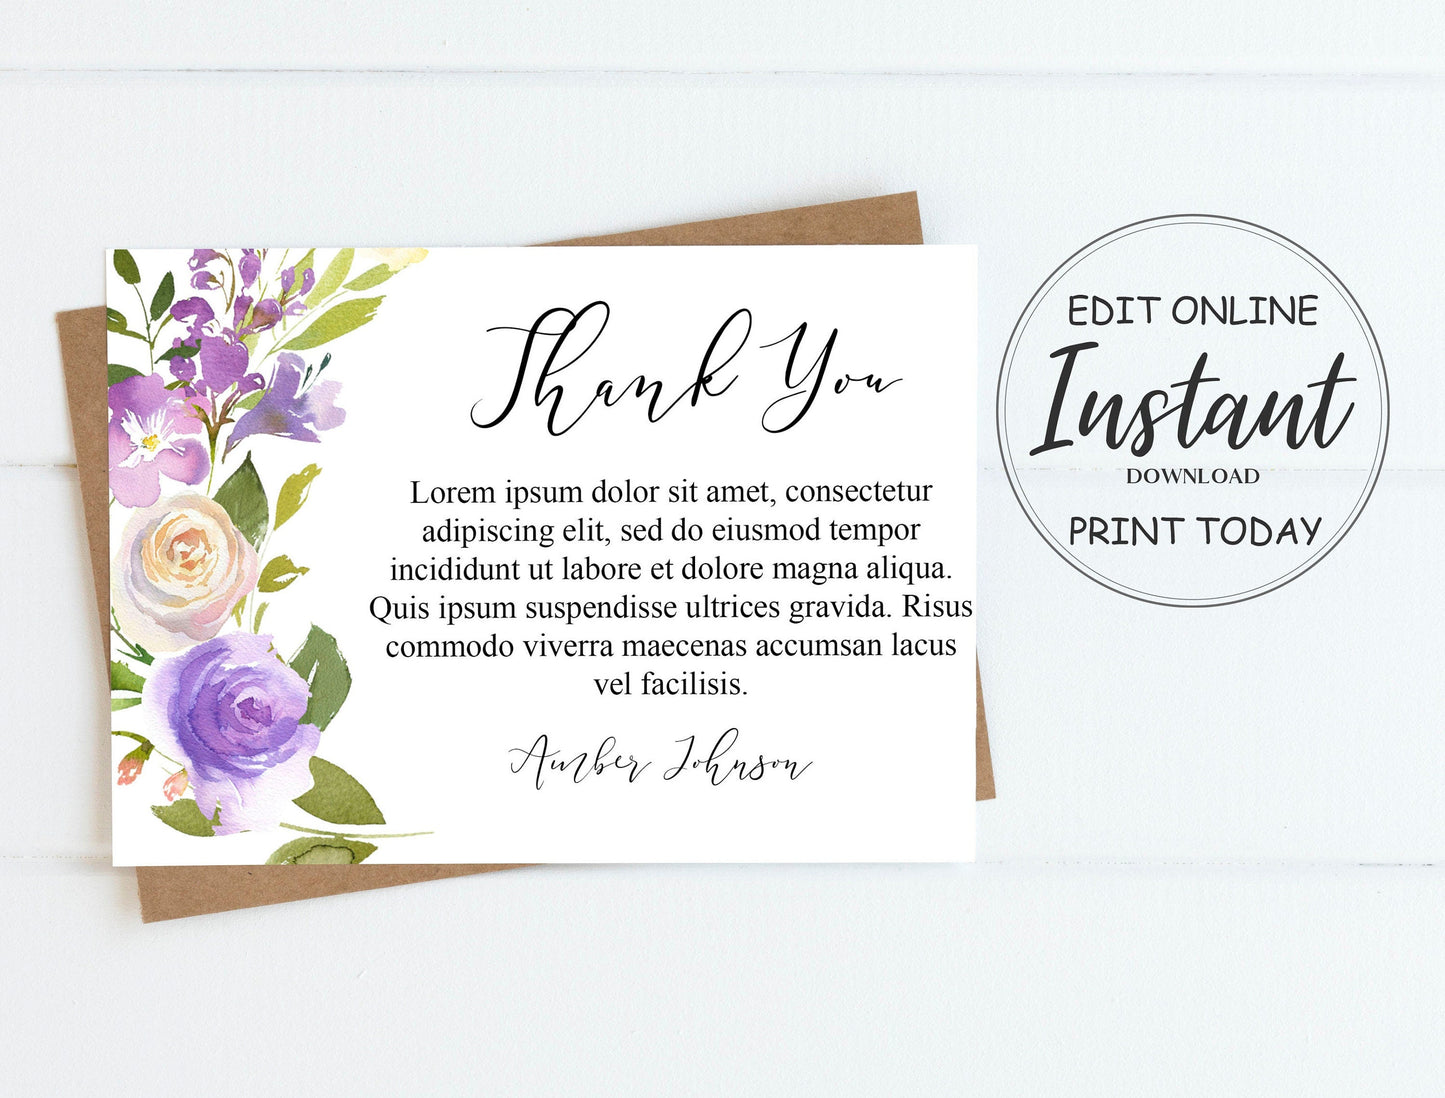 Pink and white funeral service thank you card template